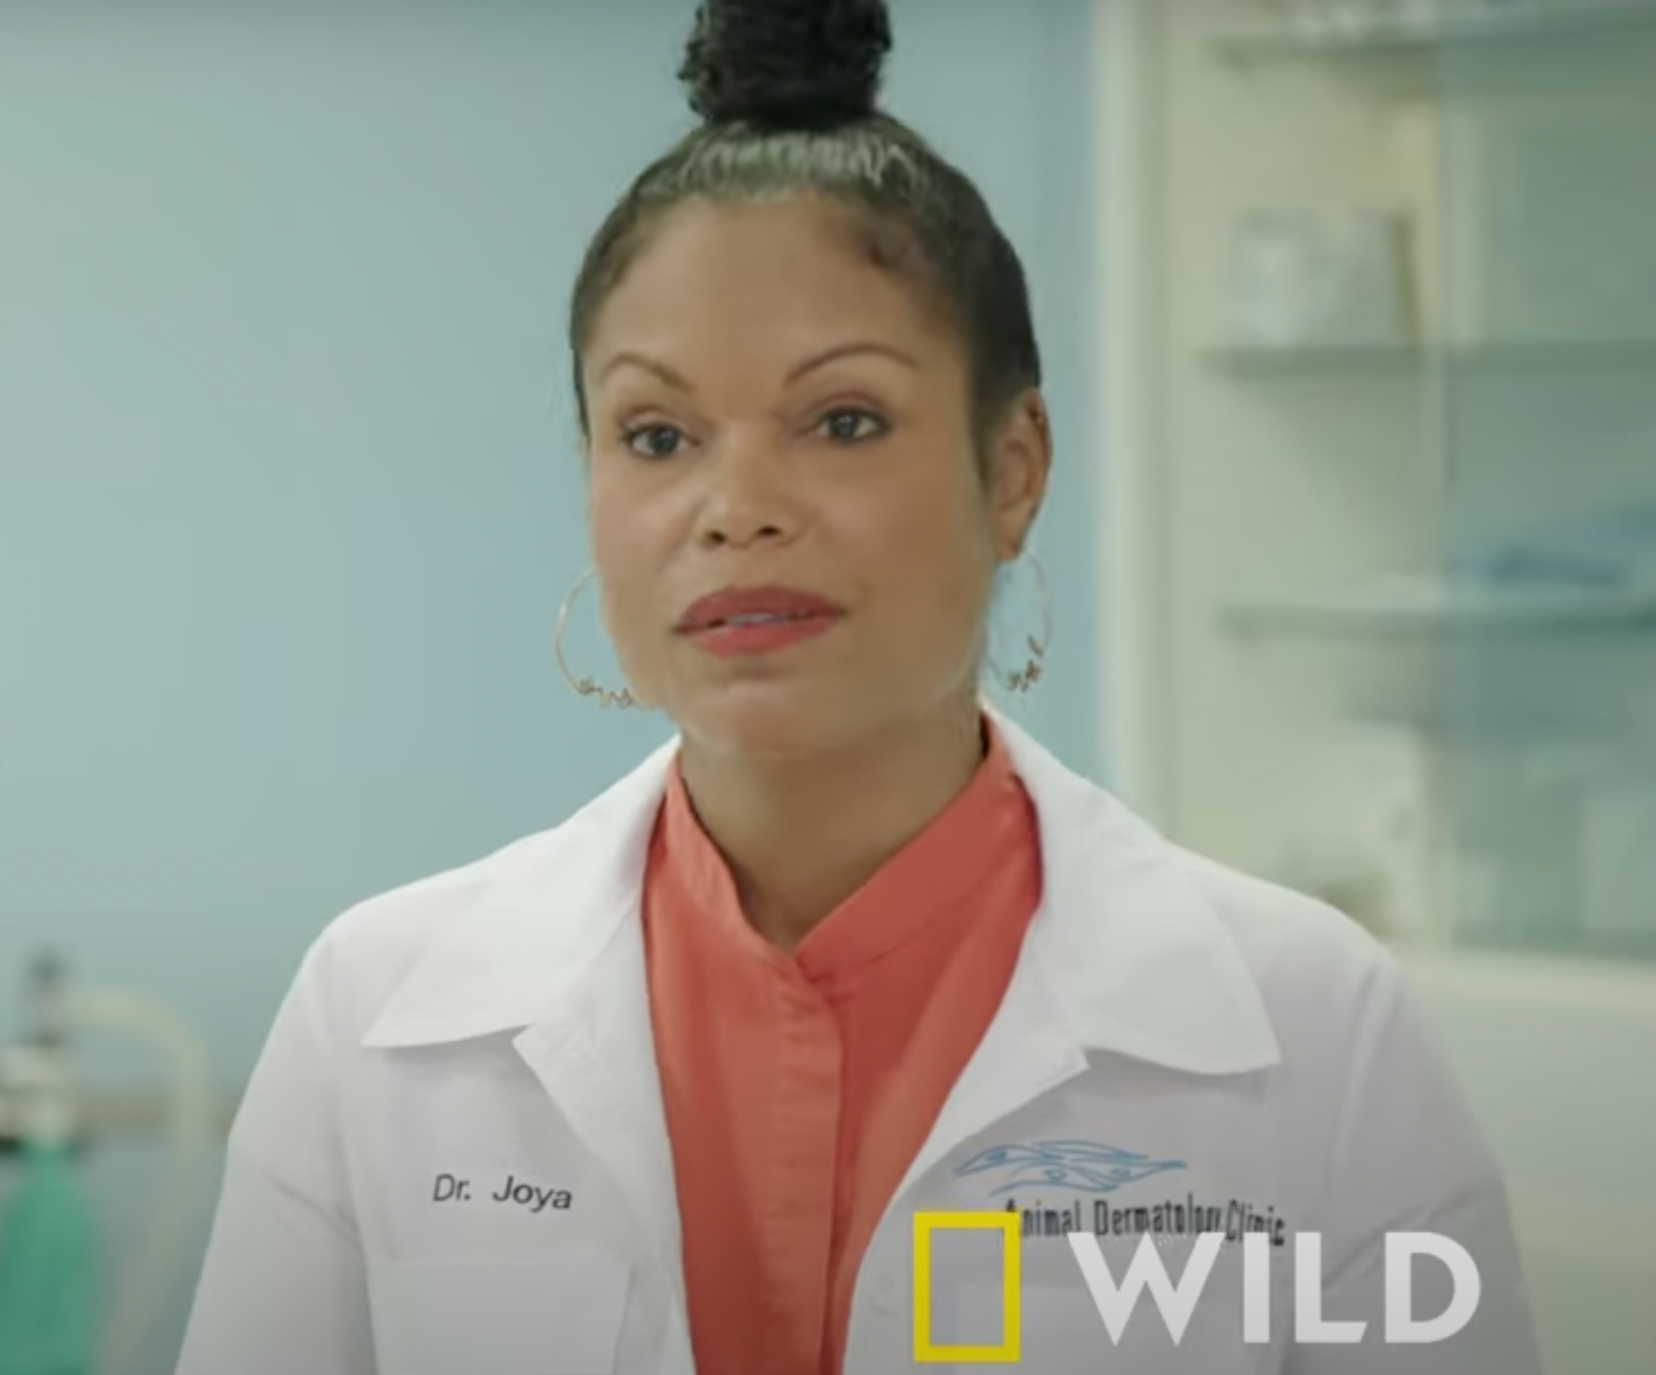 New National Geographic WILD show highlights veterinary dermatology